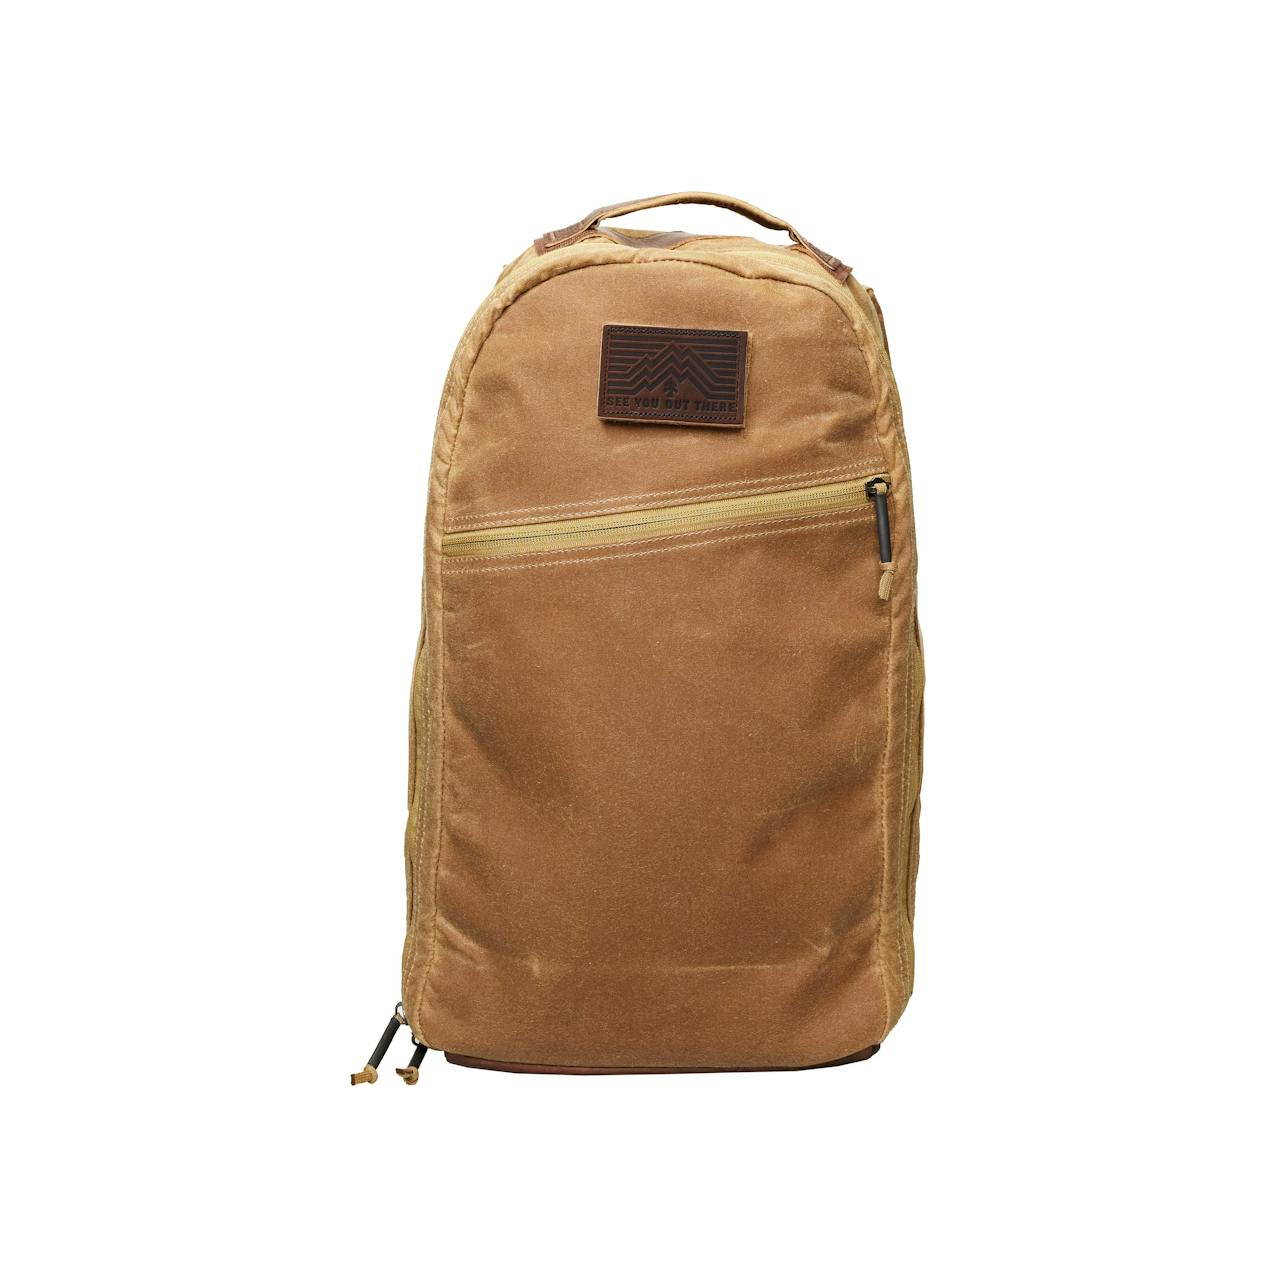 Coyote Tan Bullet 15L to “Fudge Brown”: Rit Dye More 2:1 Ratio Chocolate  Brown to Racer Red. : r/Goruck